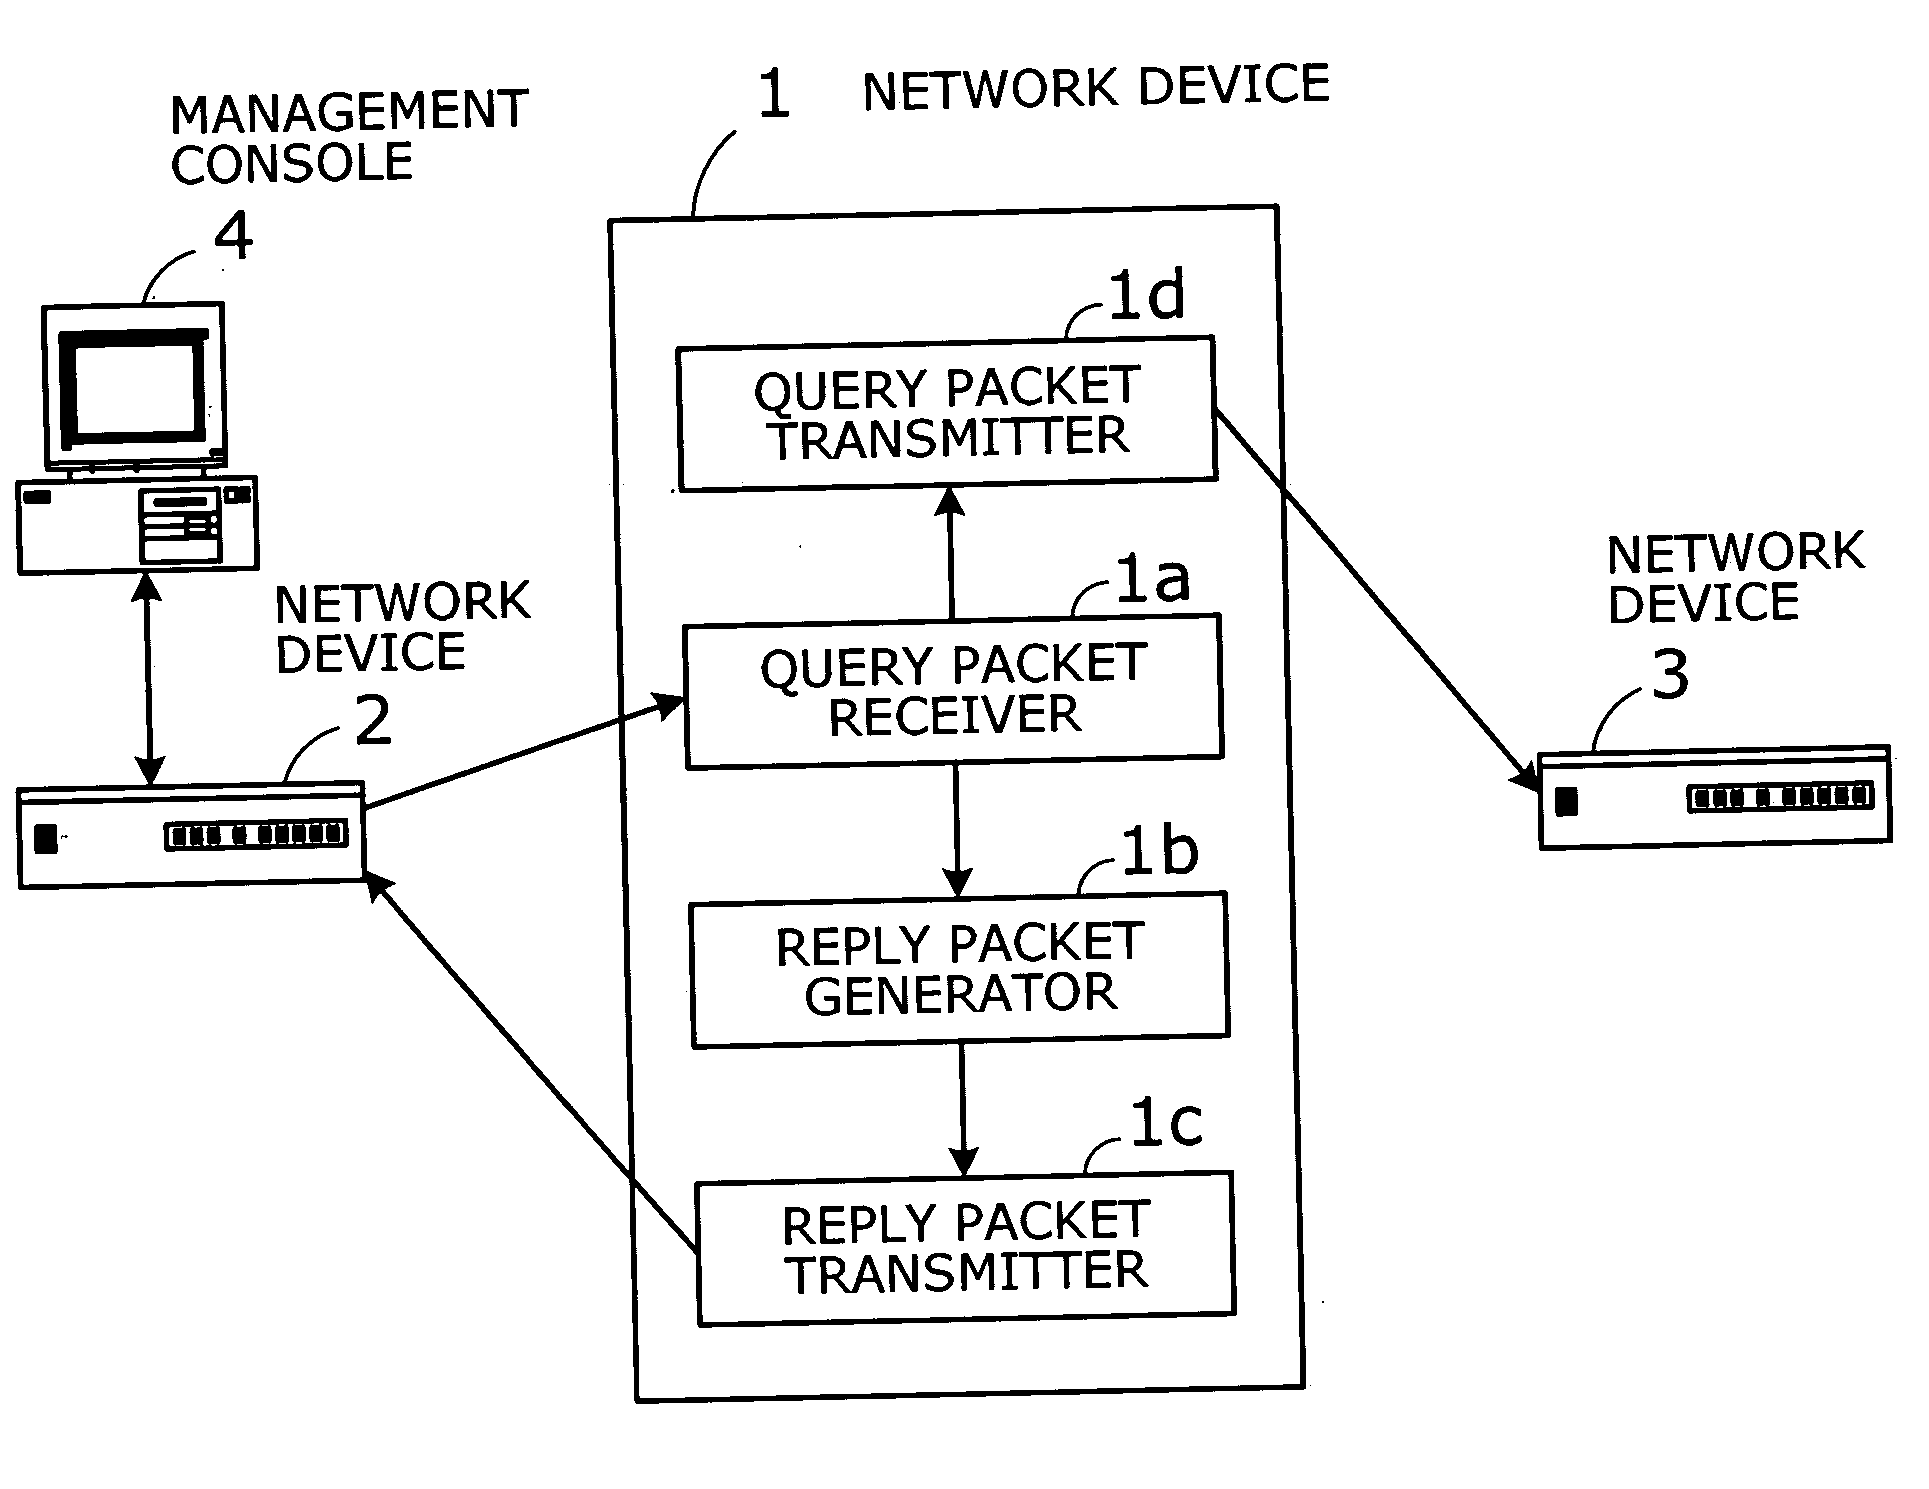 Network device with VLAN topology discovery functions